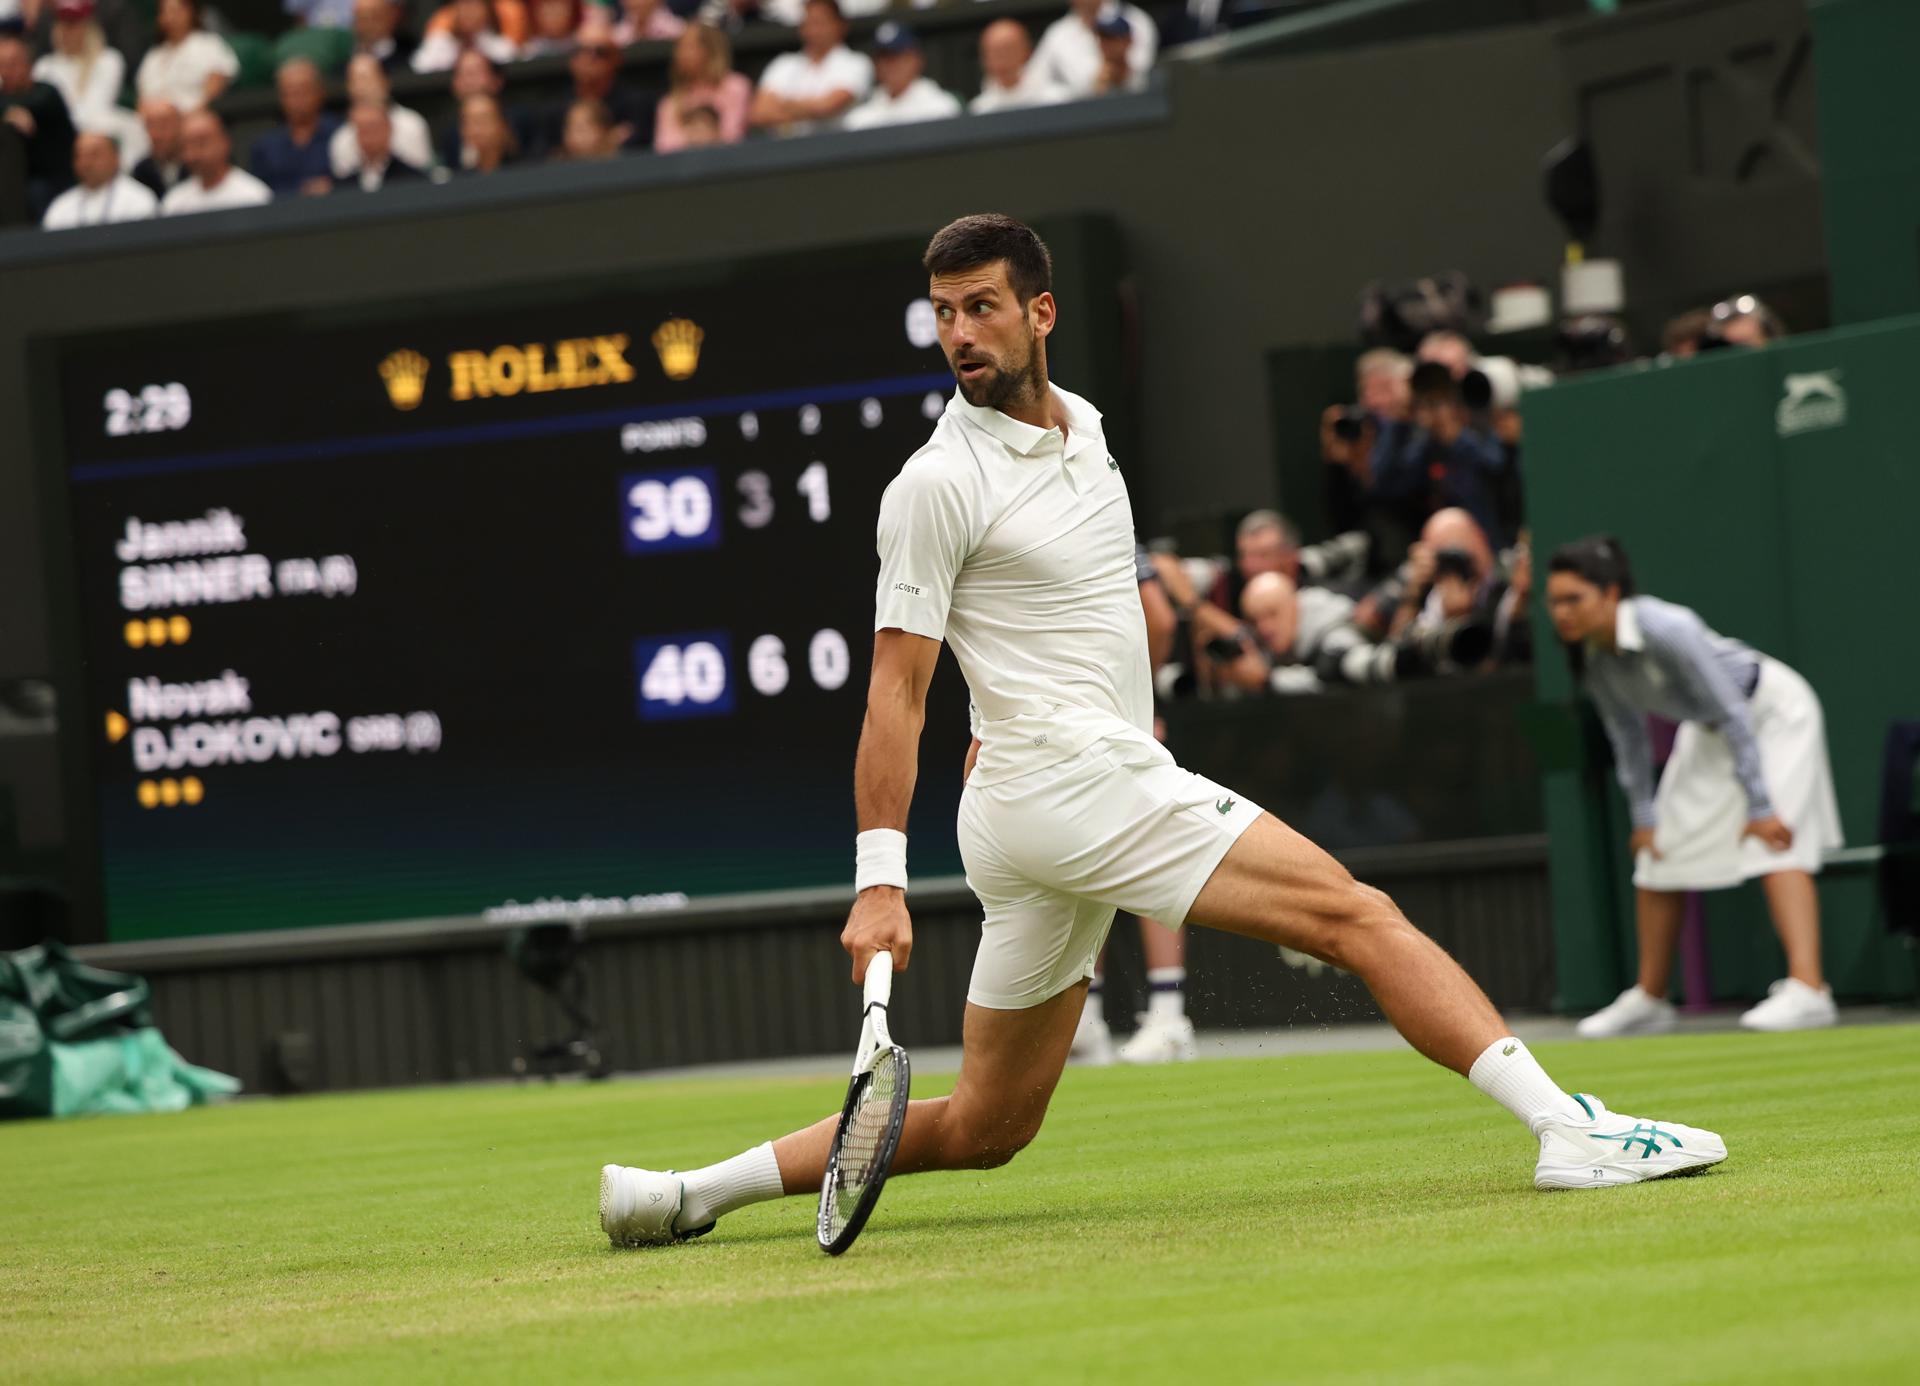 Novak Djokovic of Serbia in action during his men's singles Wimbledon semifinal match against Jannik Sinnner of Italy on 14 July 2023 in London, United Kingdom. Djokovic won 6-3, 4-6, 7-6 (7-4). EFE/EPA/NEIL HALL EDITORIAL USE ONLY
